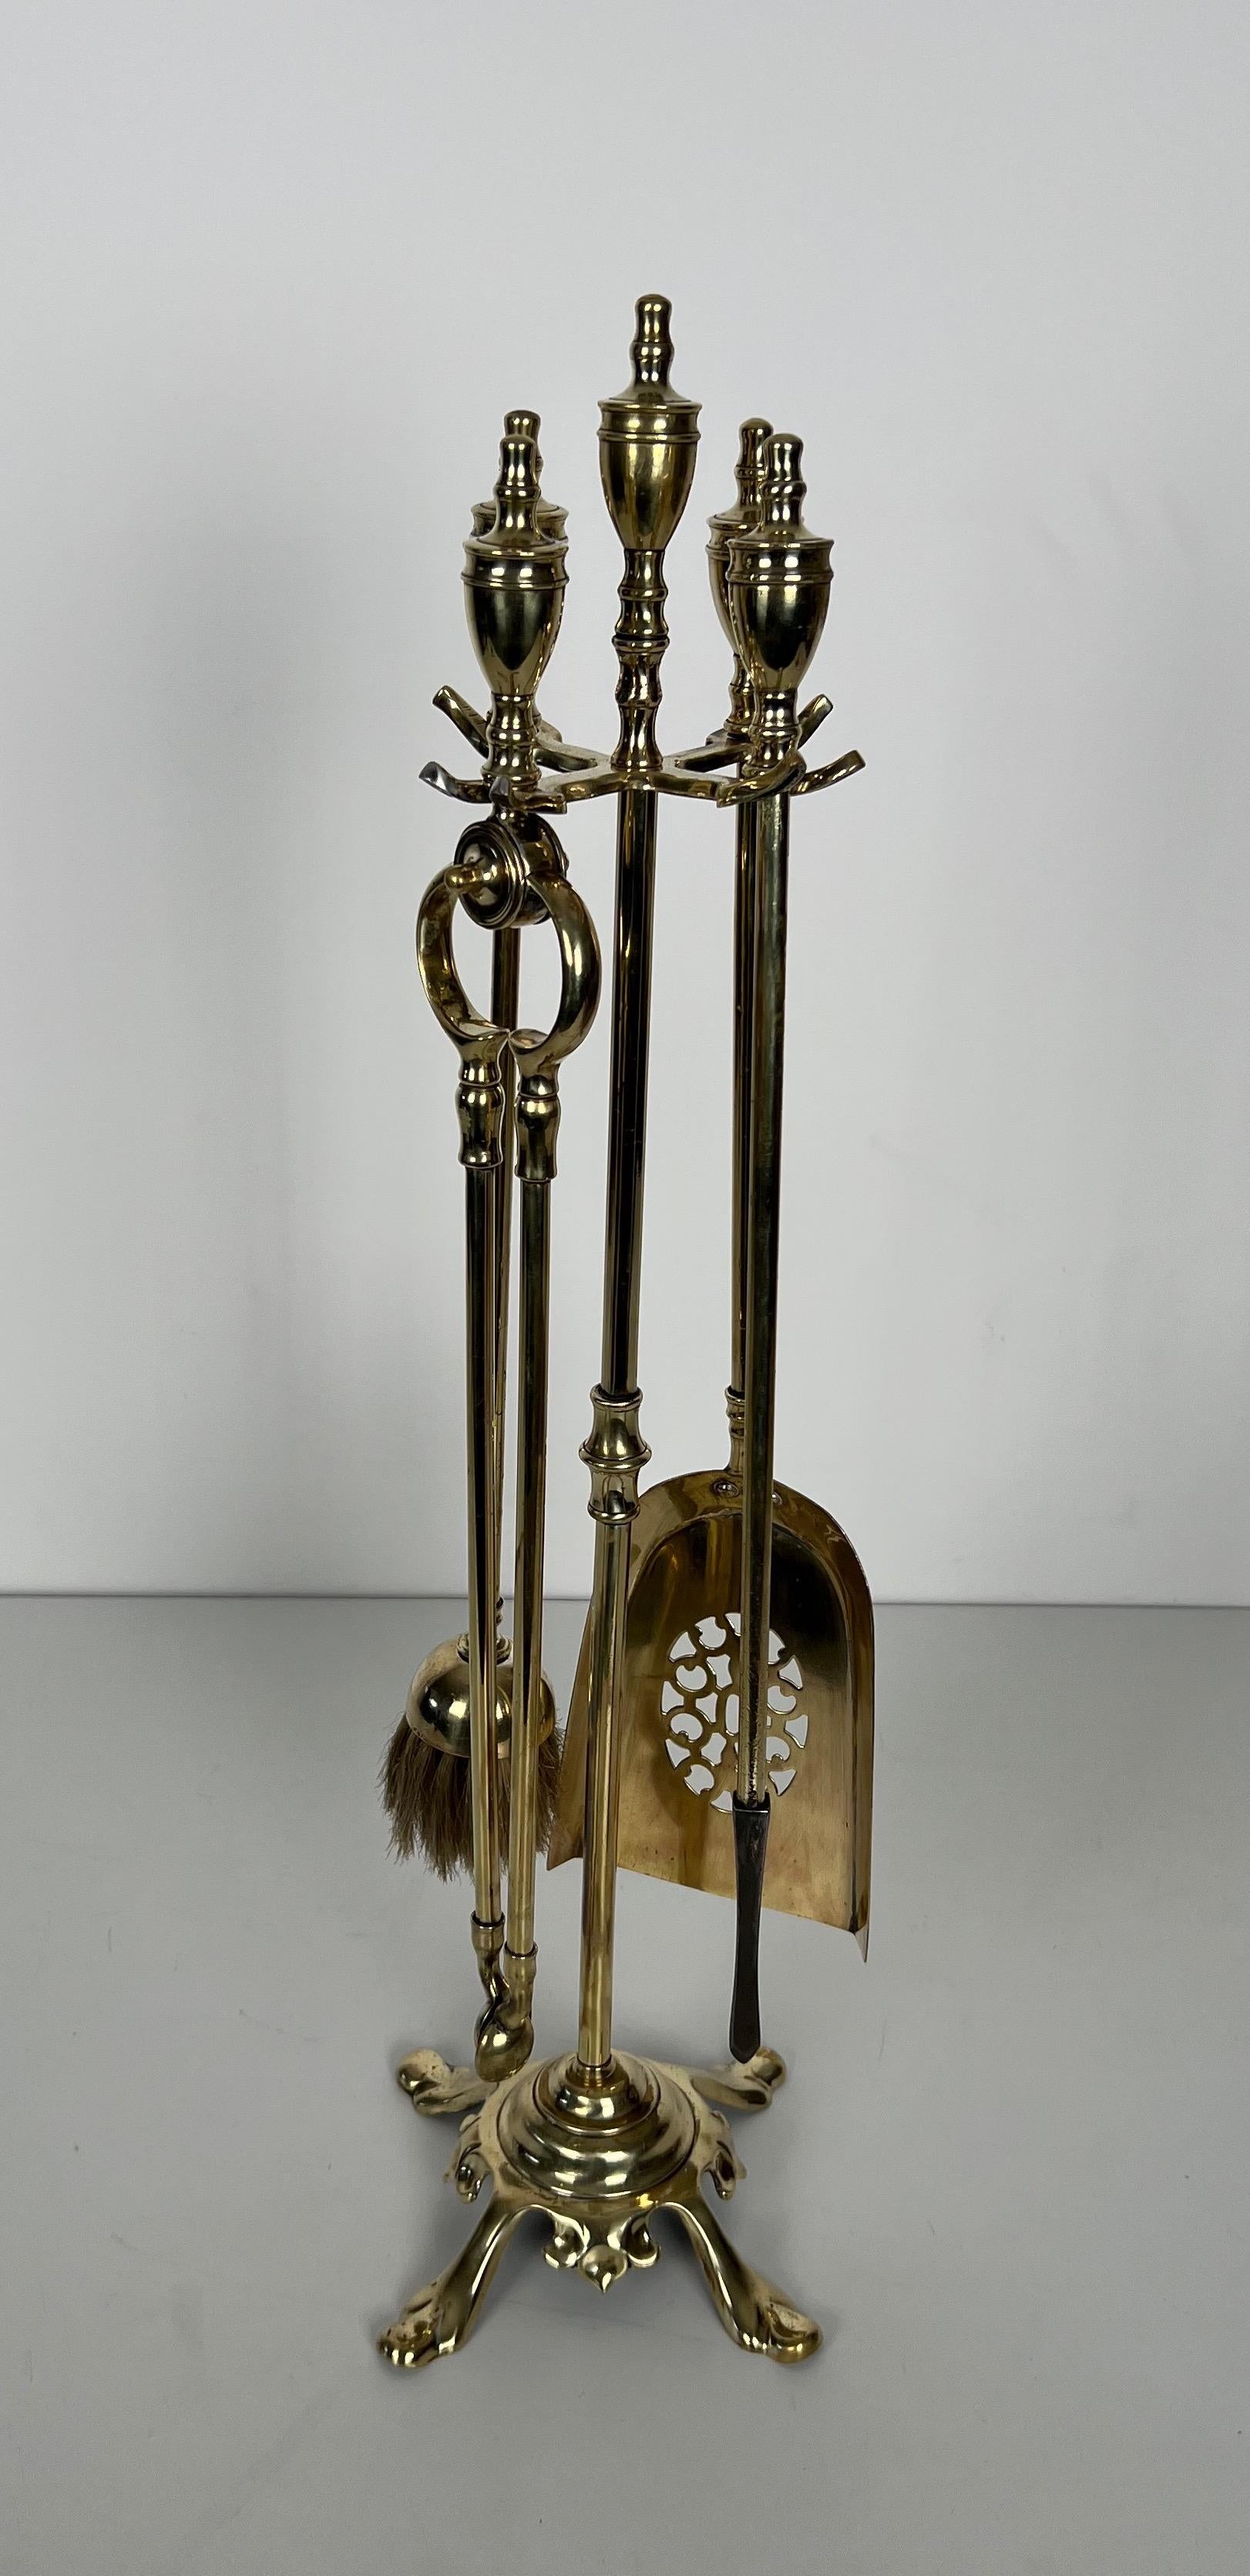 This very nice and rare neoclassical style fireplace tools on stand is made of brass. This is a fine work, the brass is finely chiseled. This is a French work. Circa 1940